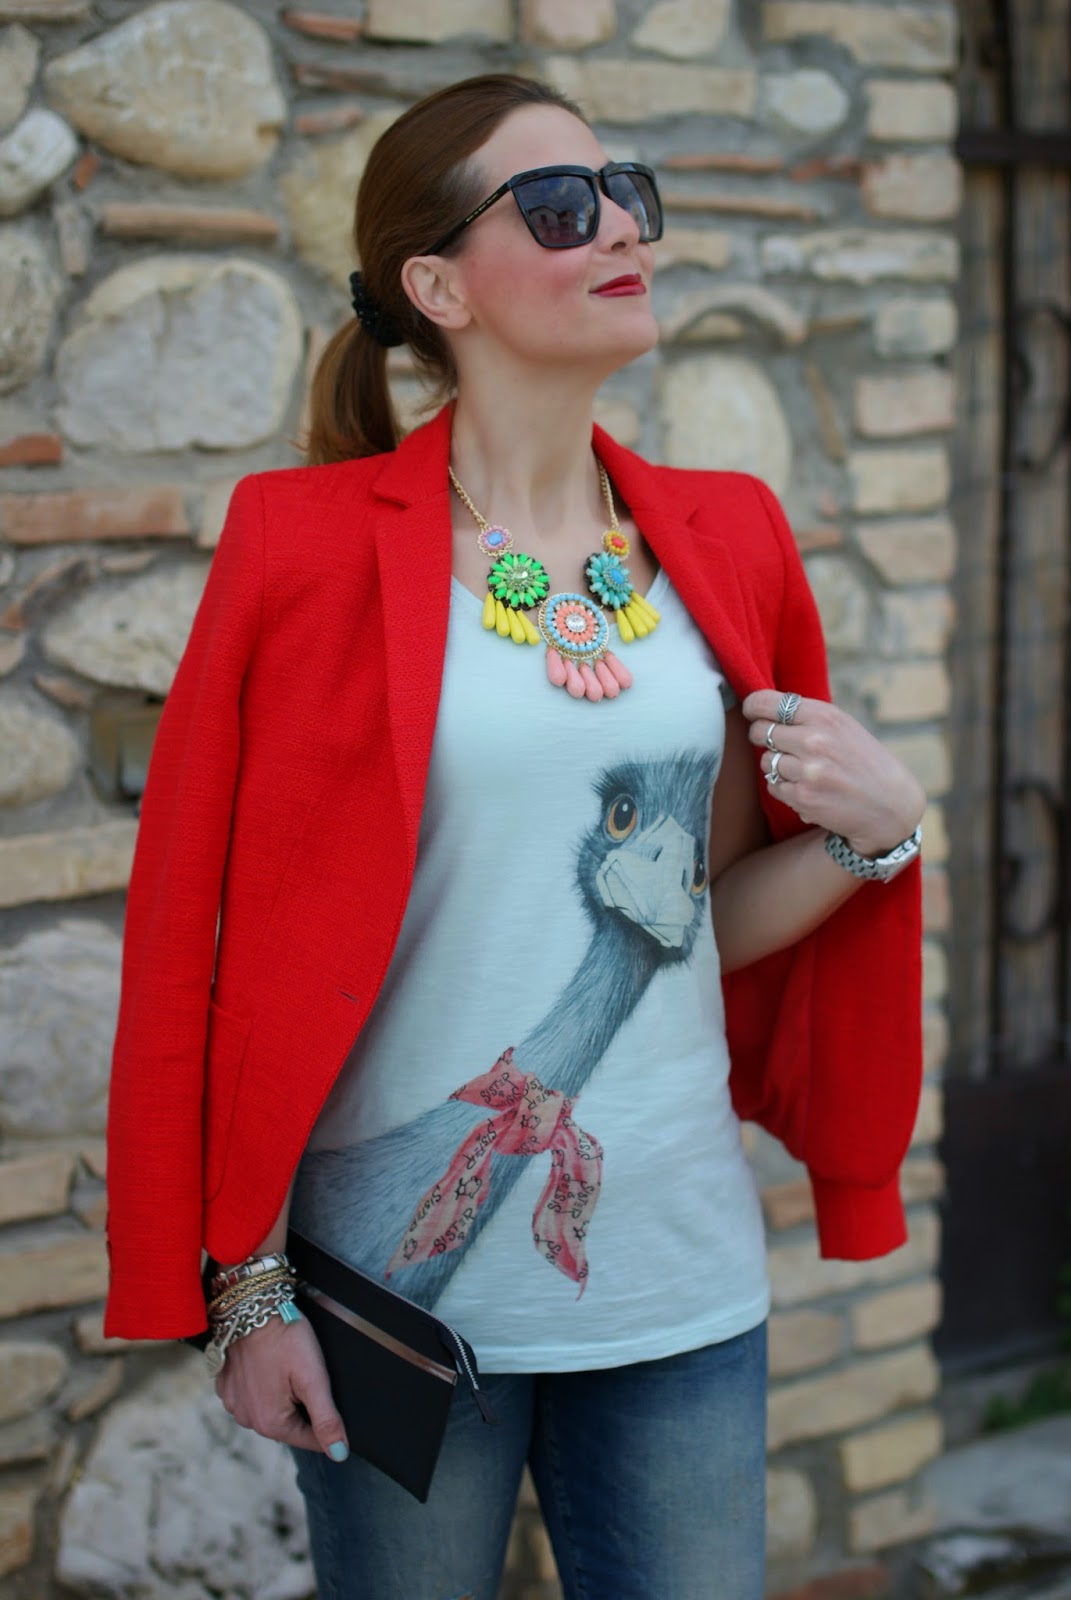 ostrich tee, sister & sister, zara blazer, today i'm me evening clutch, Fashion and Cookies, fashion blogger